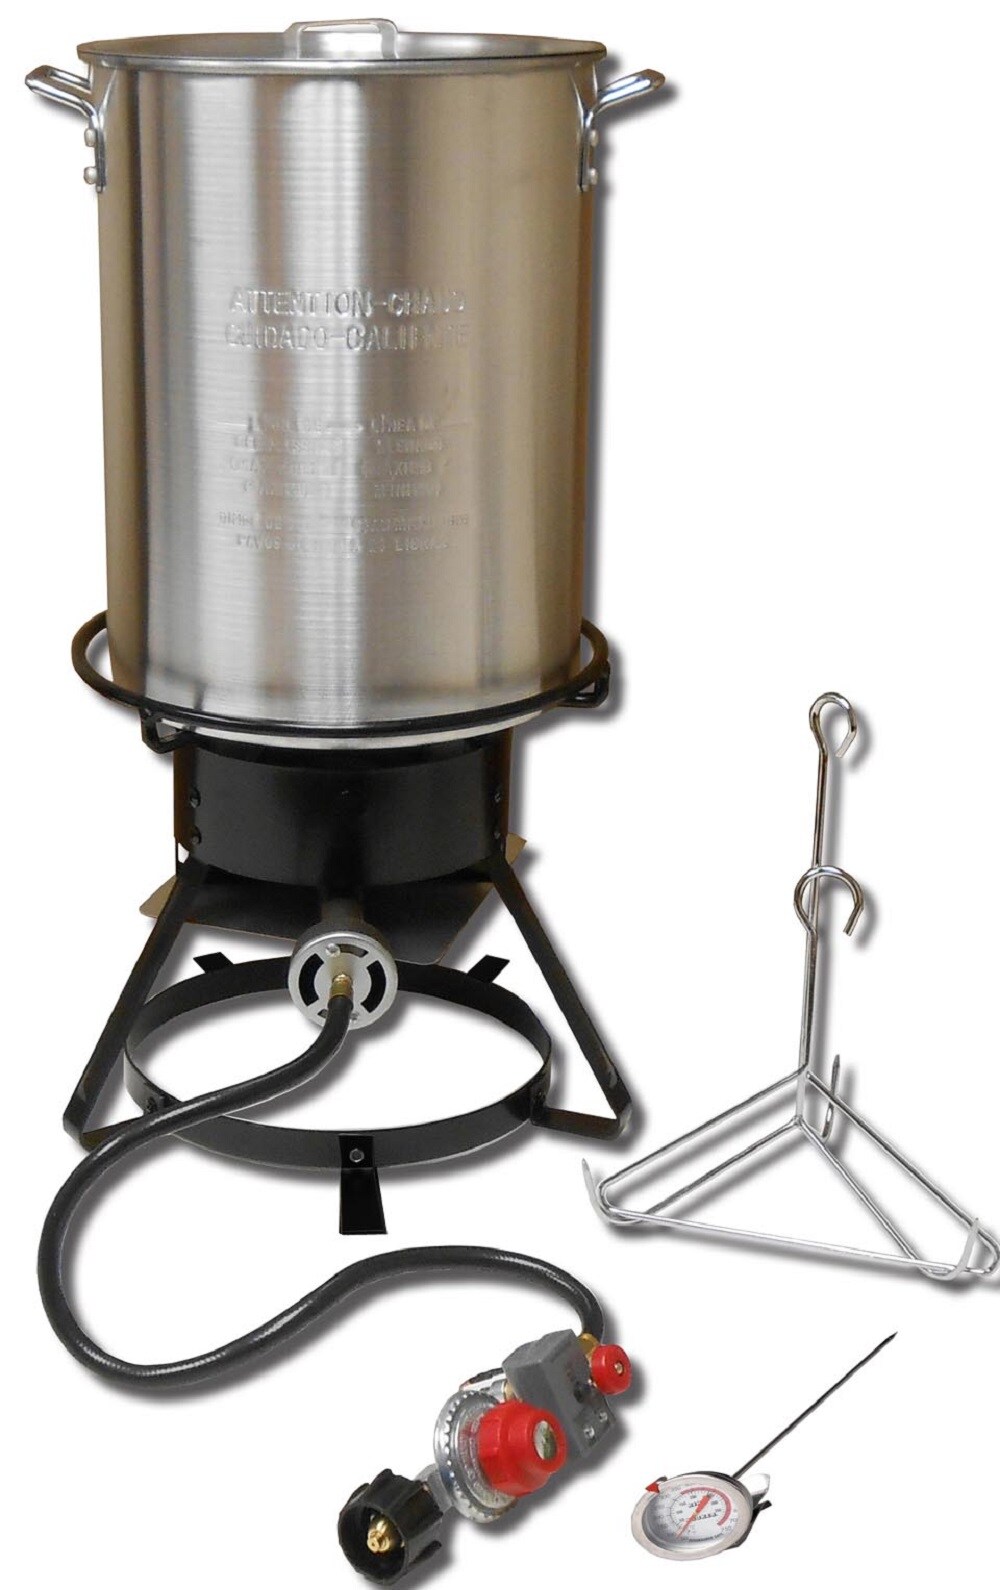 King Kooker SS1267 Stainless Steel 30-Quart Turkey Frying Propane Outdoor Cooker Package with Battery Operated Time 